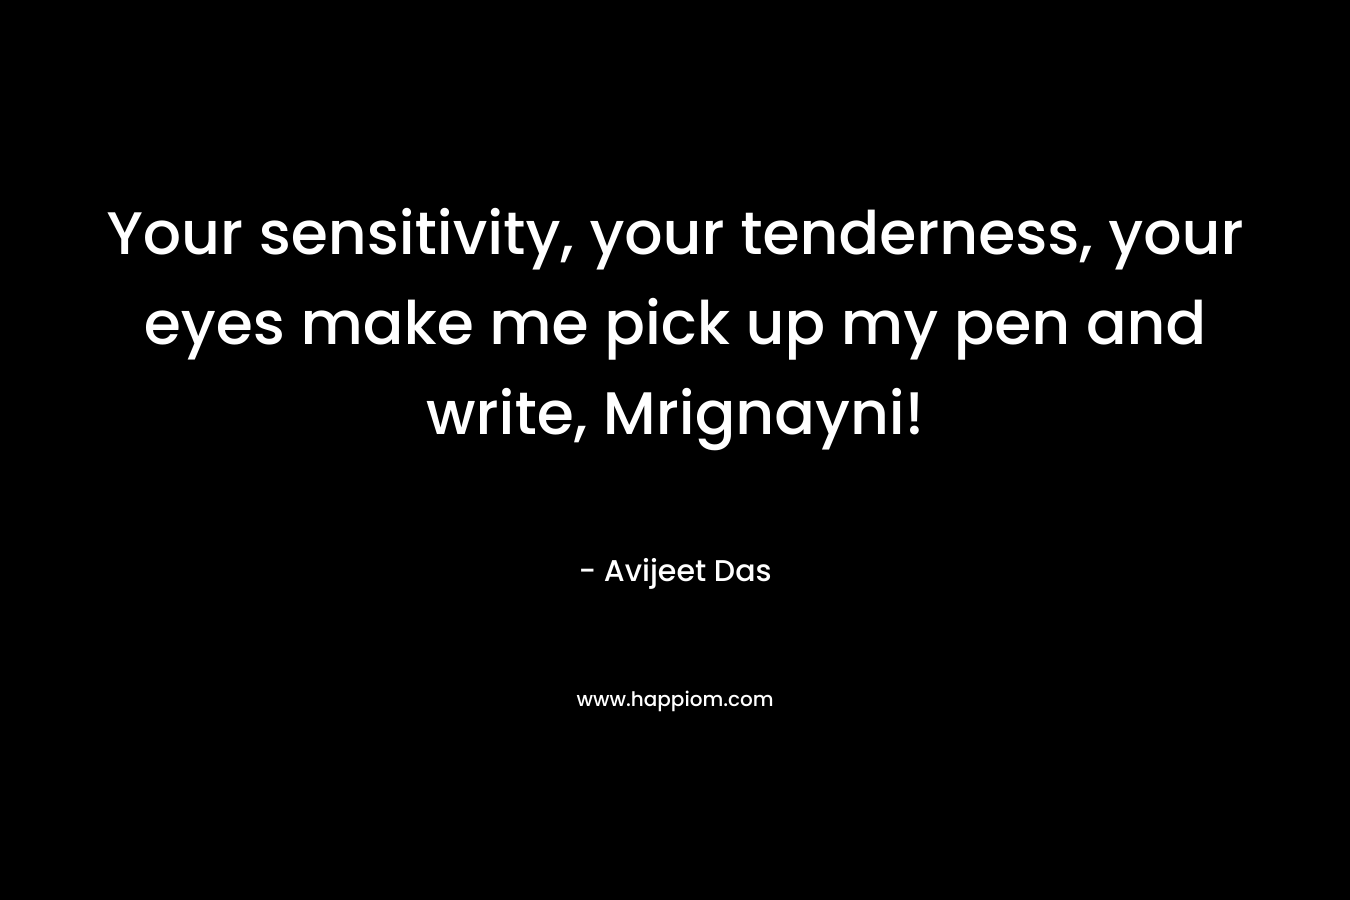 Your sensitivity, your tenderness, your eyes make me pick up my pen and write, Mrignayni! – Avijeet Das